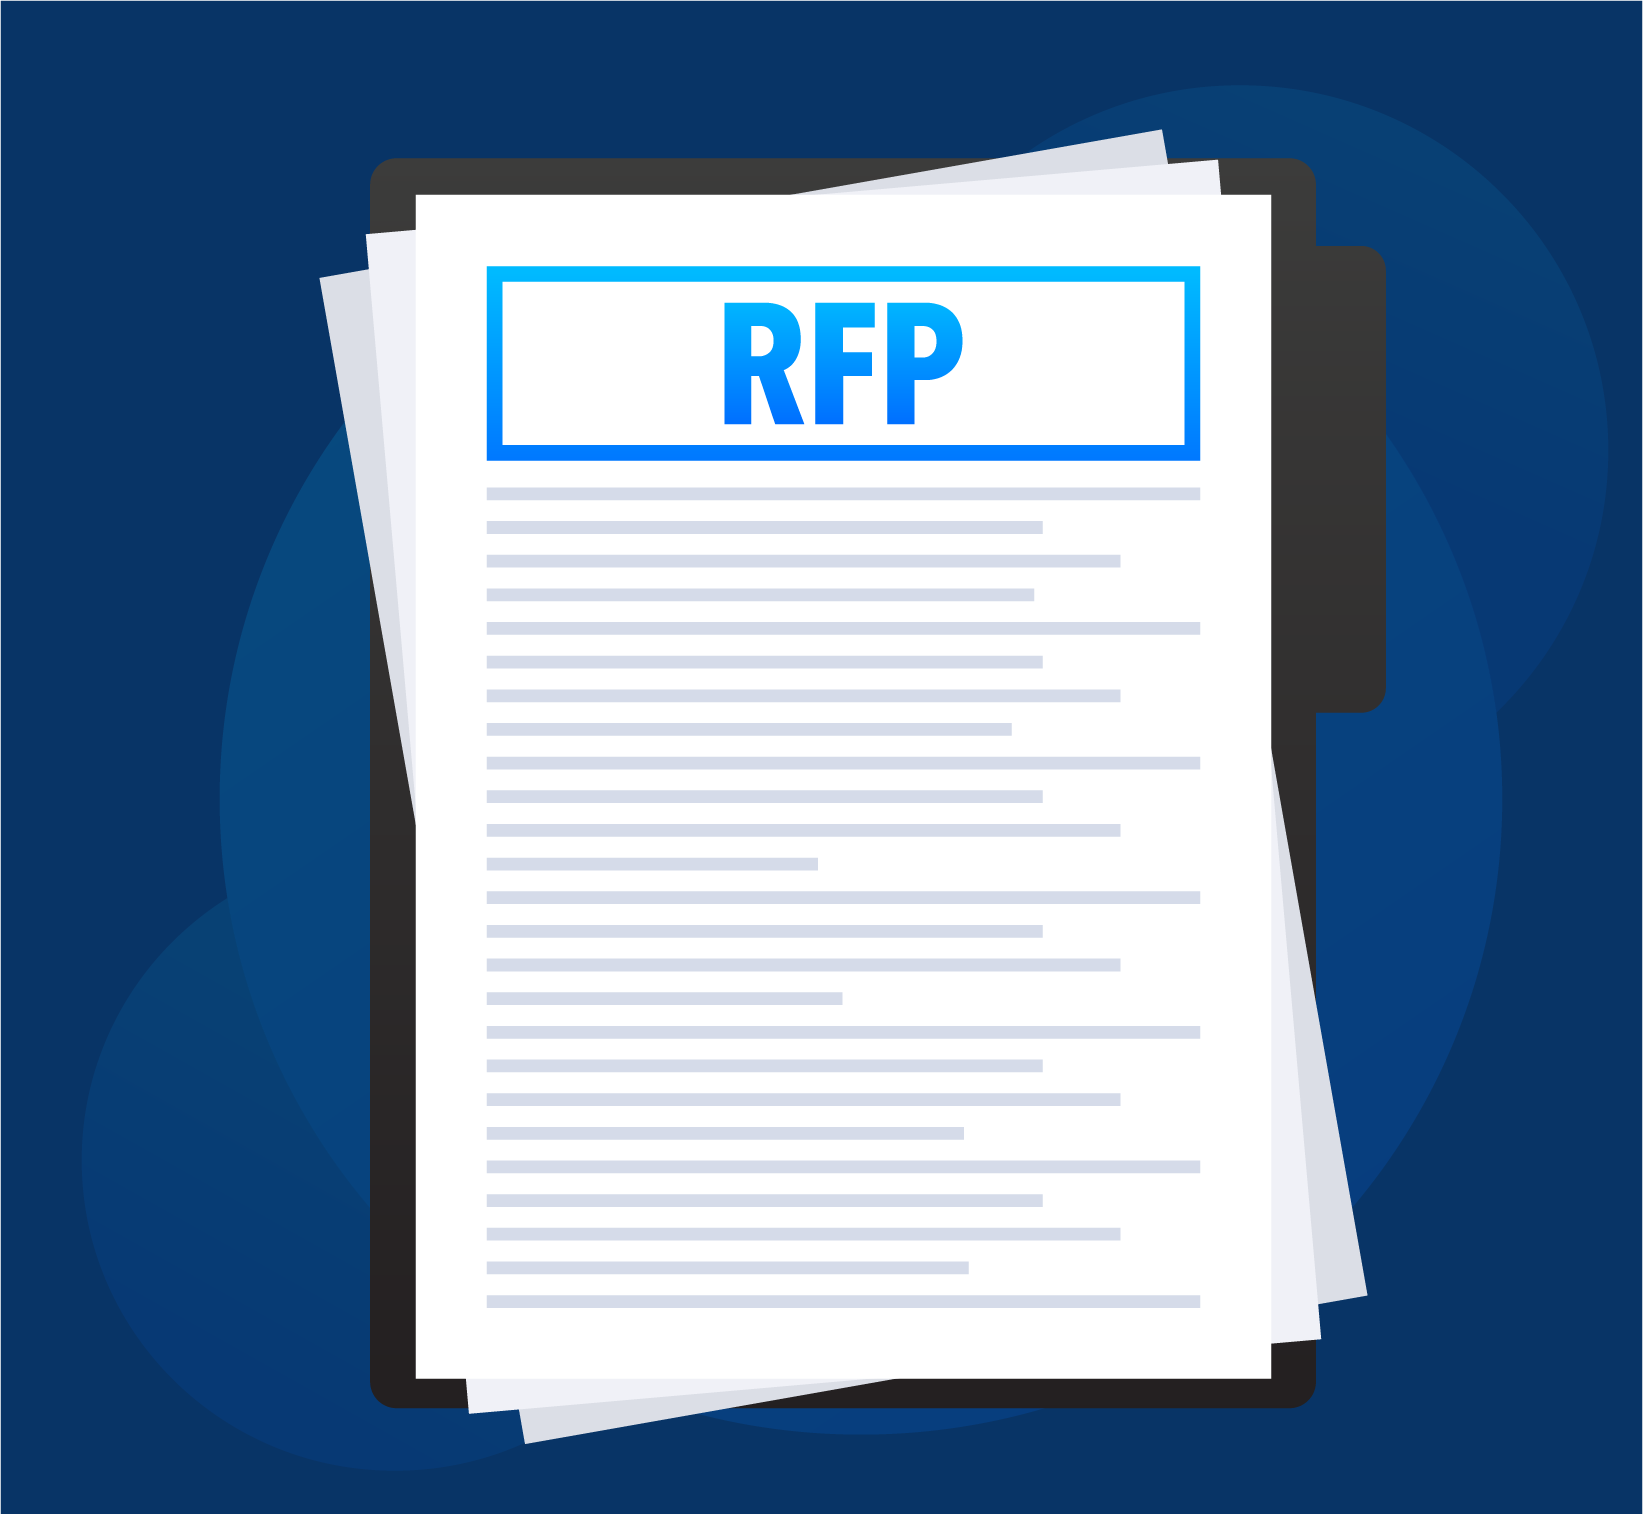 RFP Request for Proposal